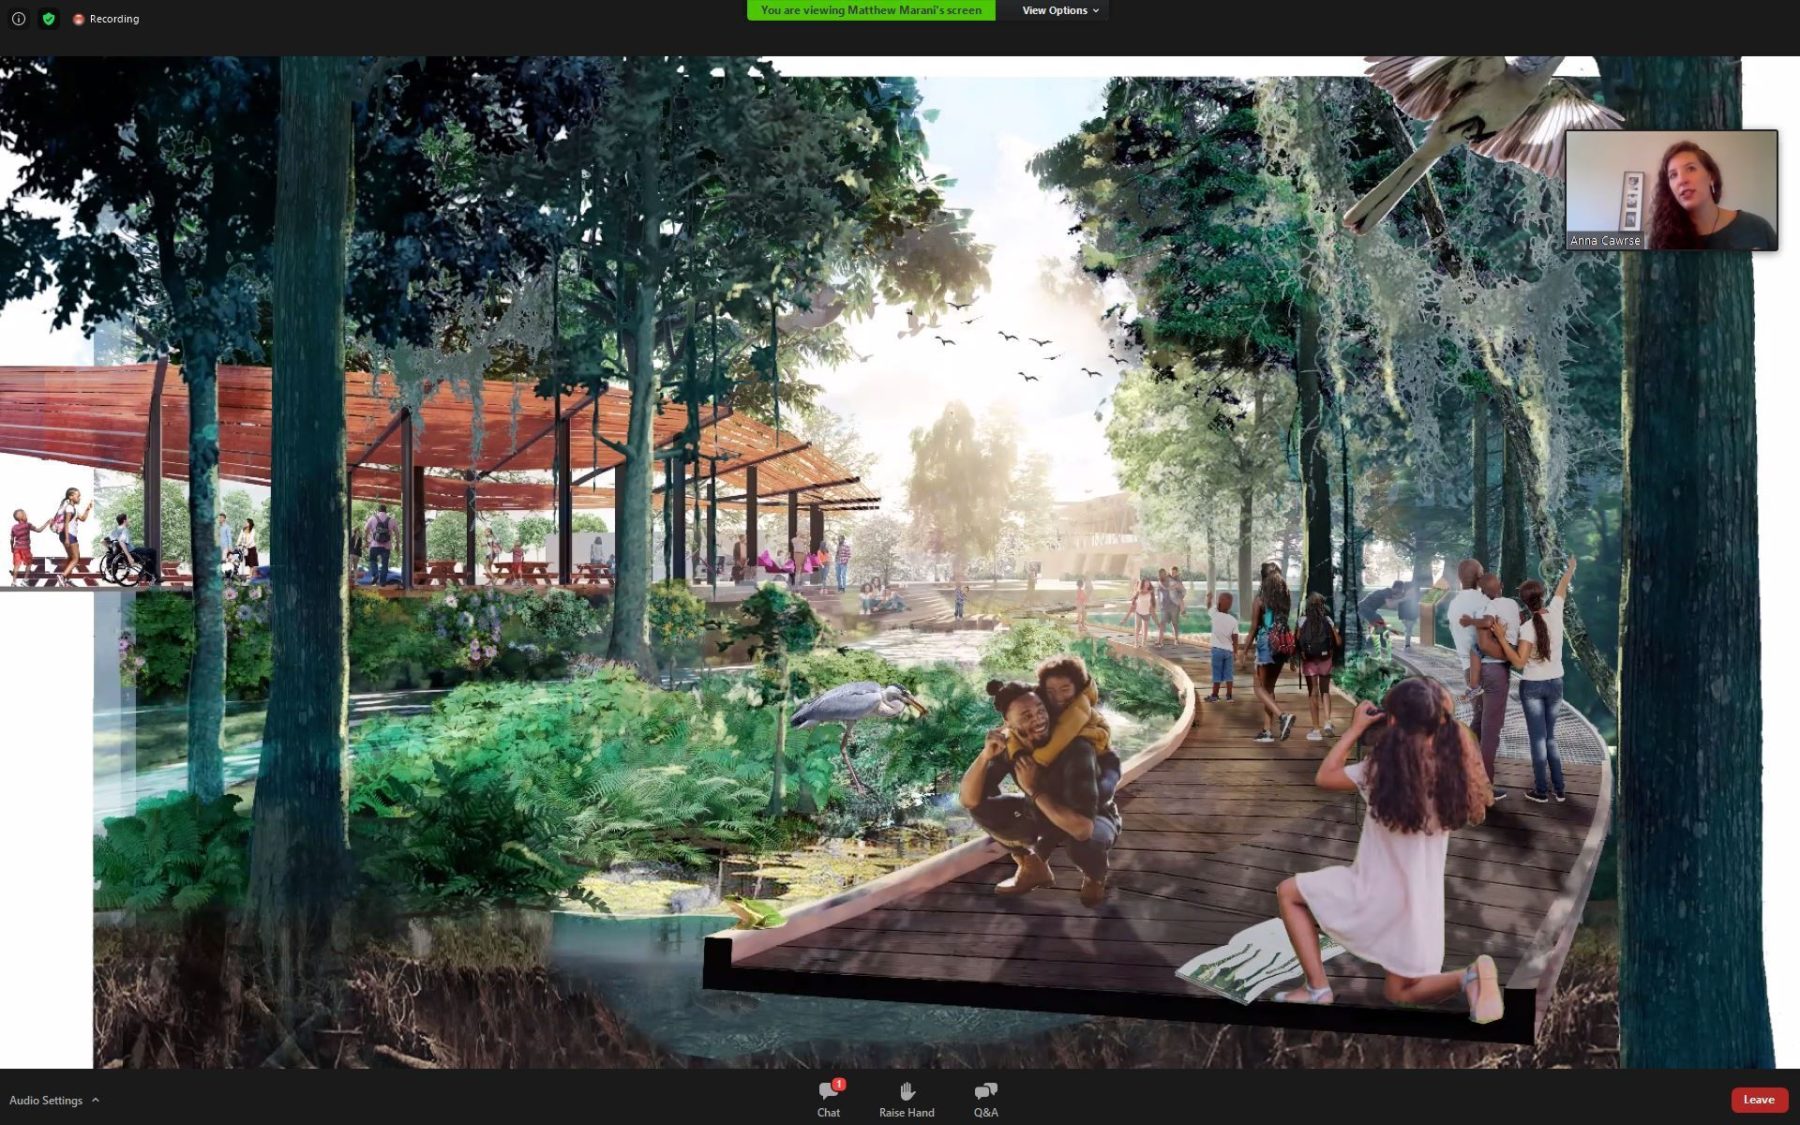 Rendering of a new, wild Bayou Promenade with families enjoying the boardwalk